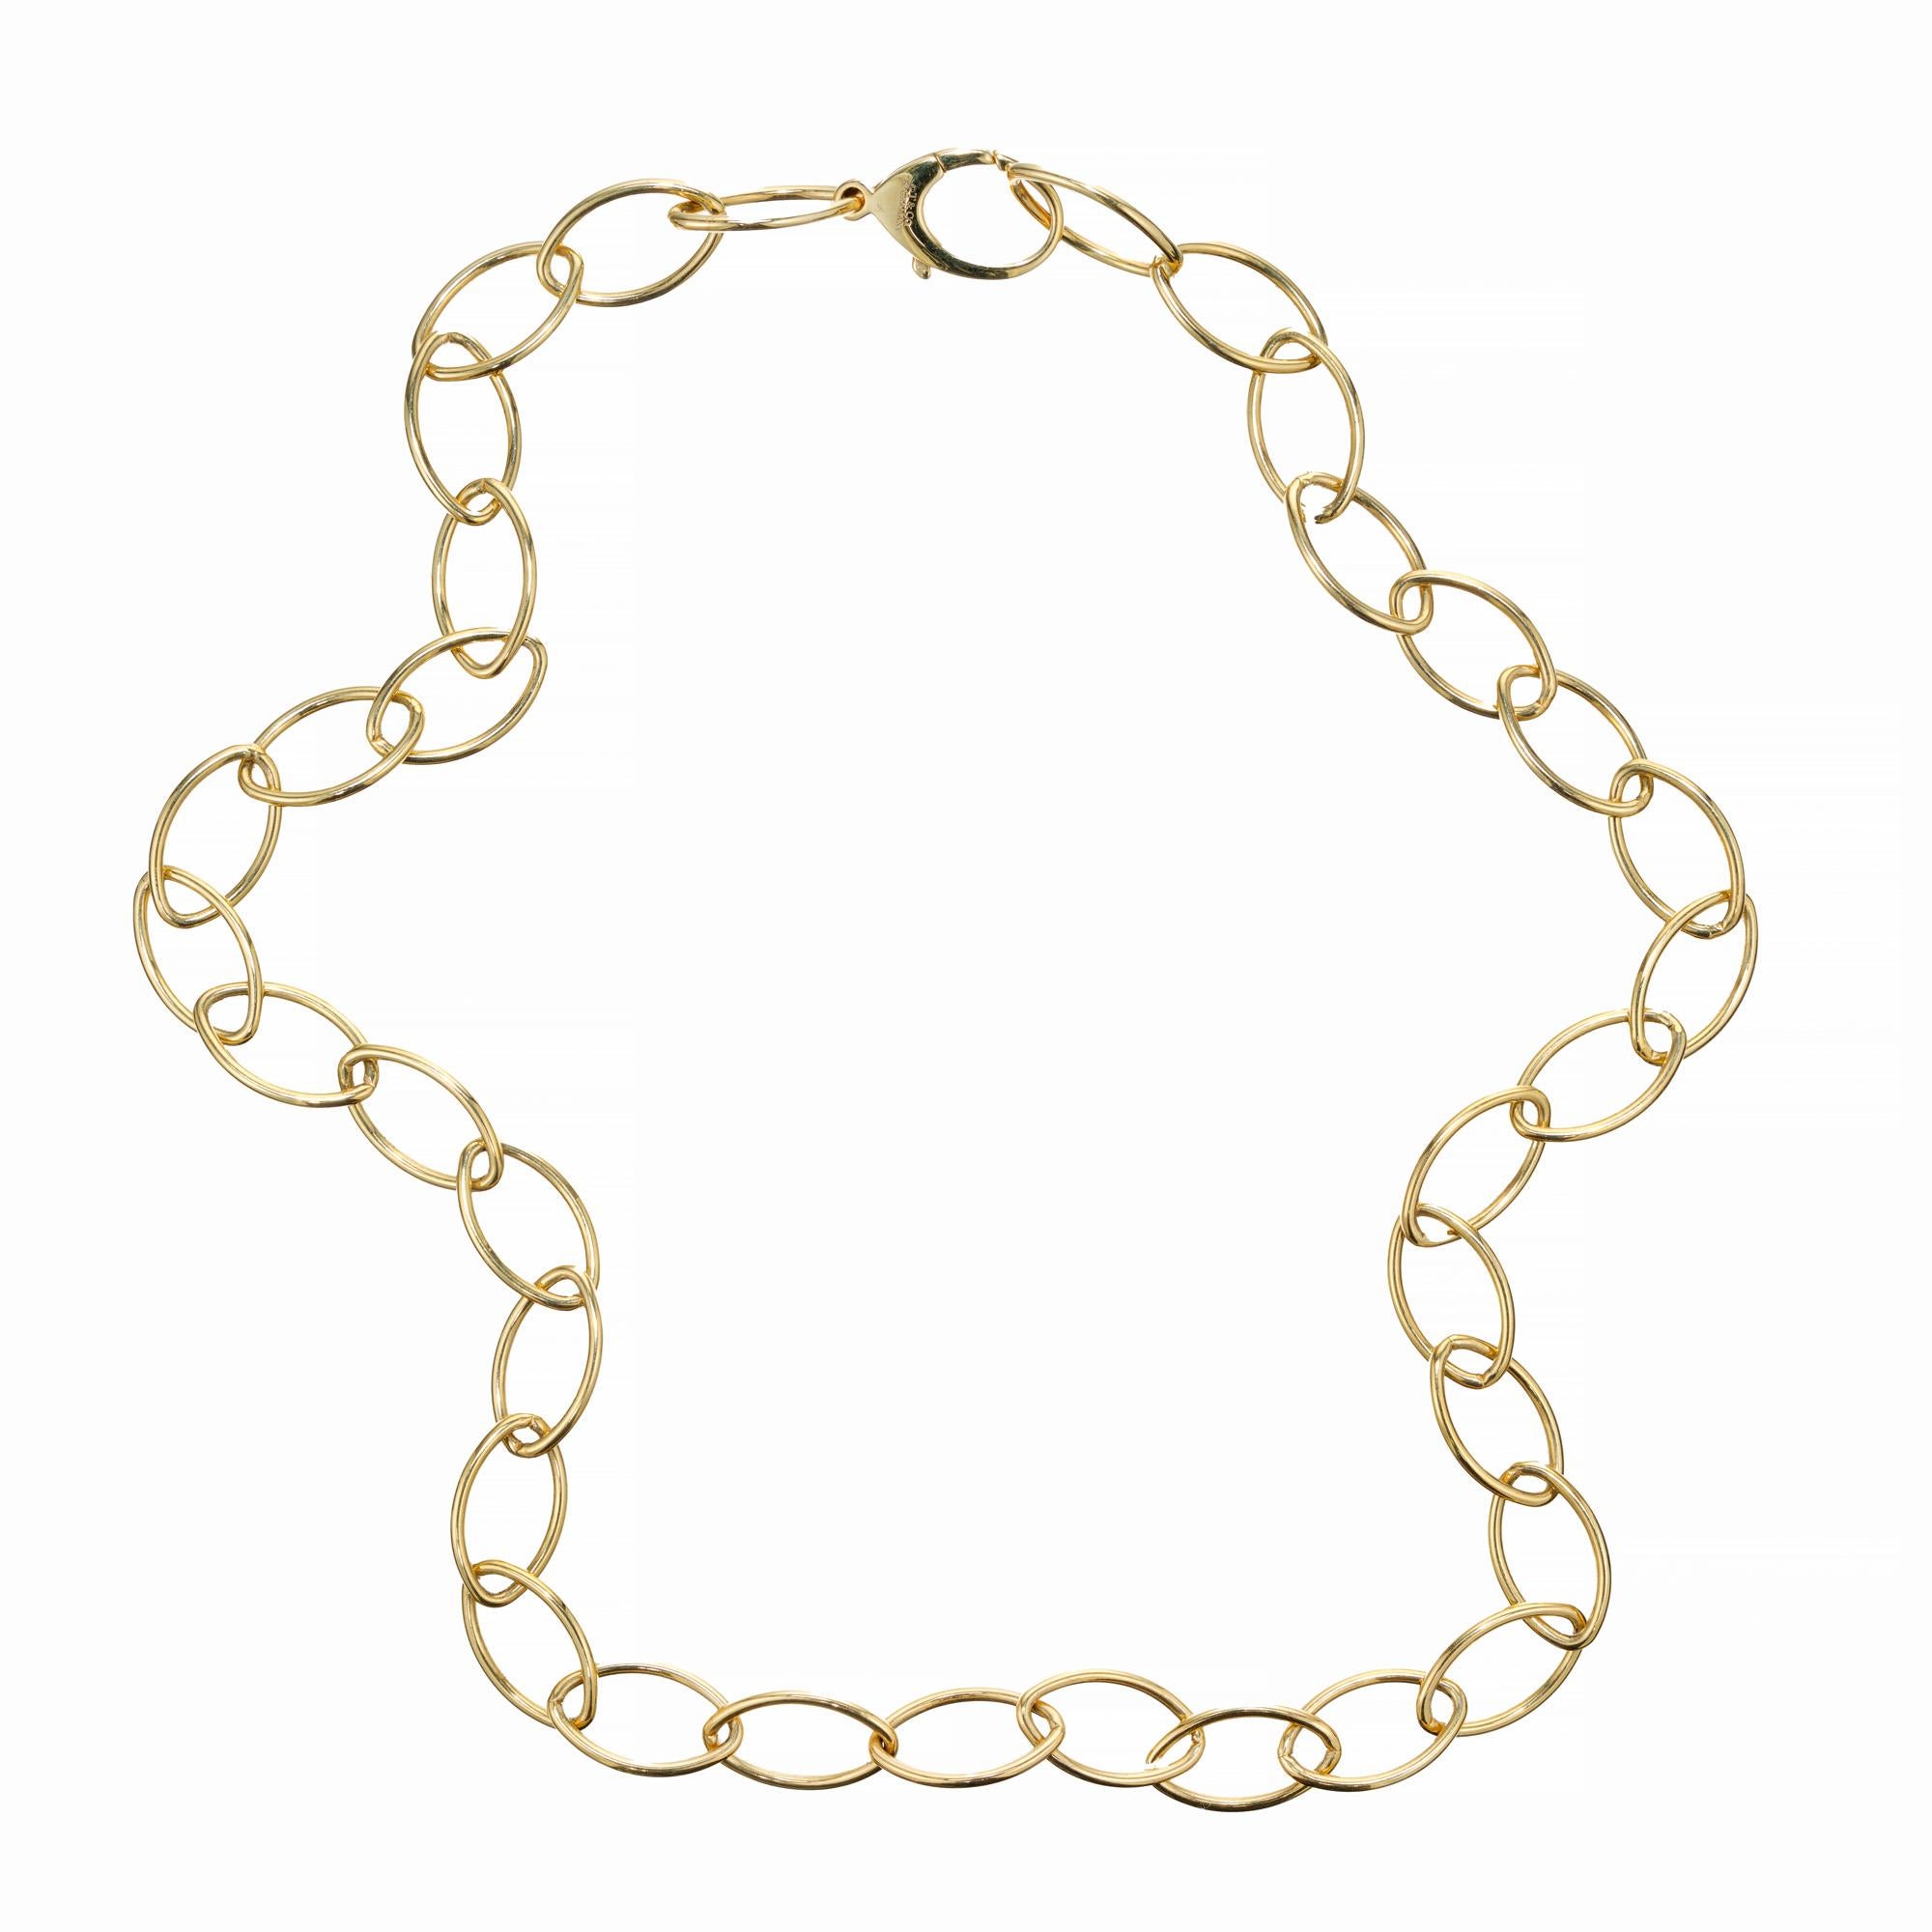 Beautiful Tiffany & Co. oval link solid 22 inch long necklace made in Germany. Included with a Tiffany black suede folder case,

18k yellow gold 
Stamped: 750 Germany
Hallmark: Tiffany+Co
43.9 grams
Chain: 22 Inches
Width: 10.9mm
Thickness/depth